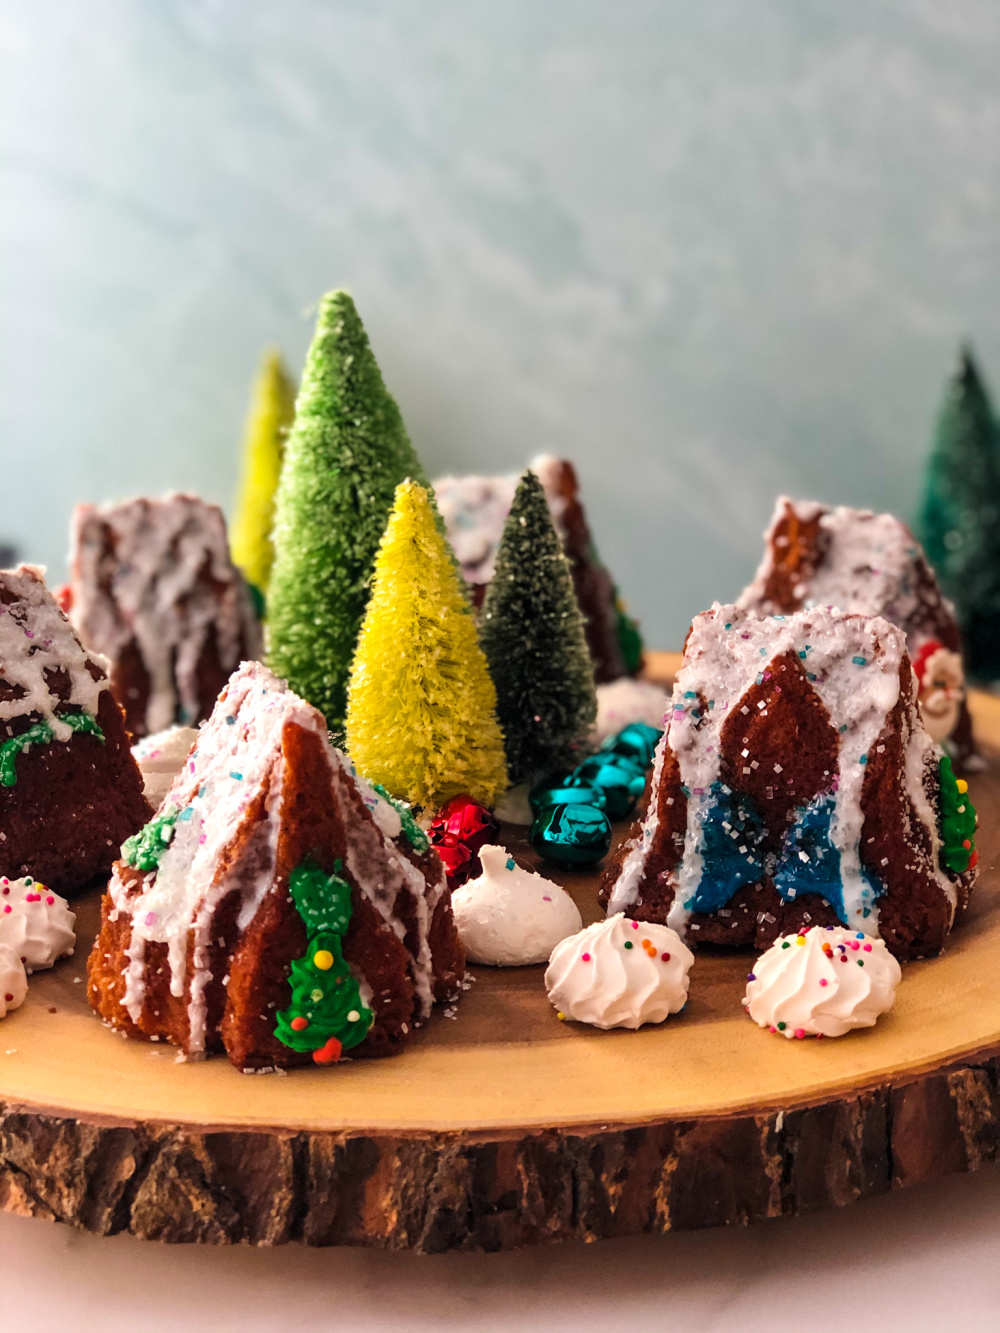 The set up of the edible Christmas village uses a wooden surface